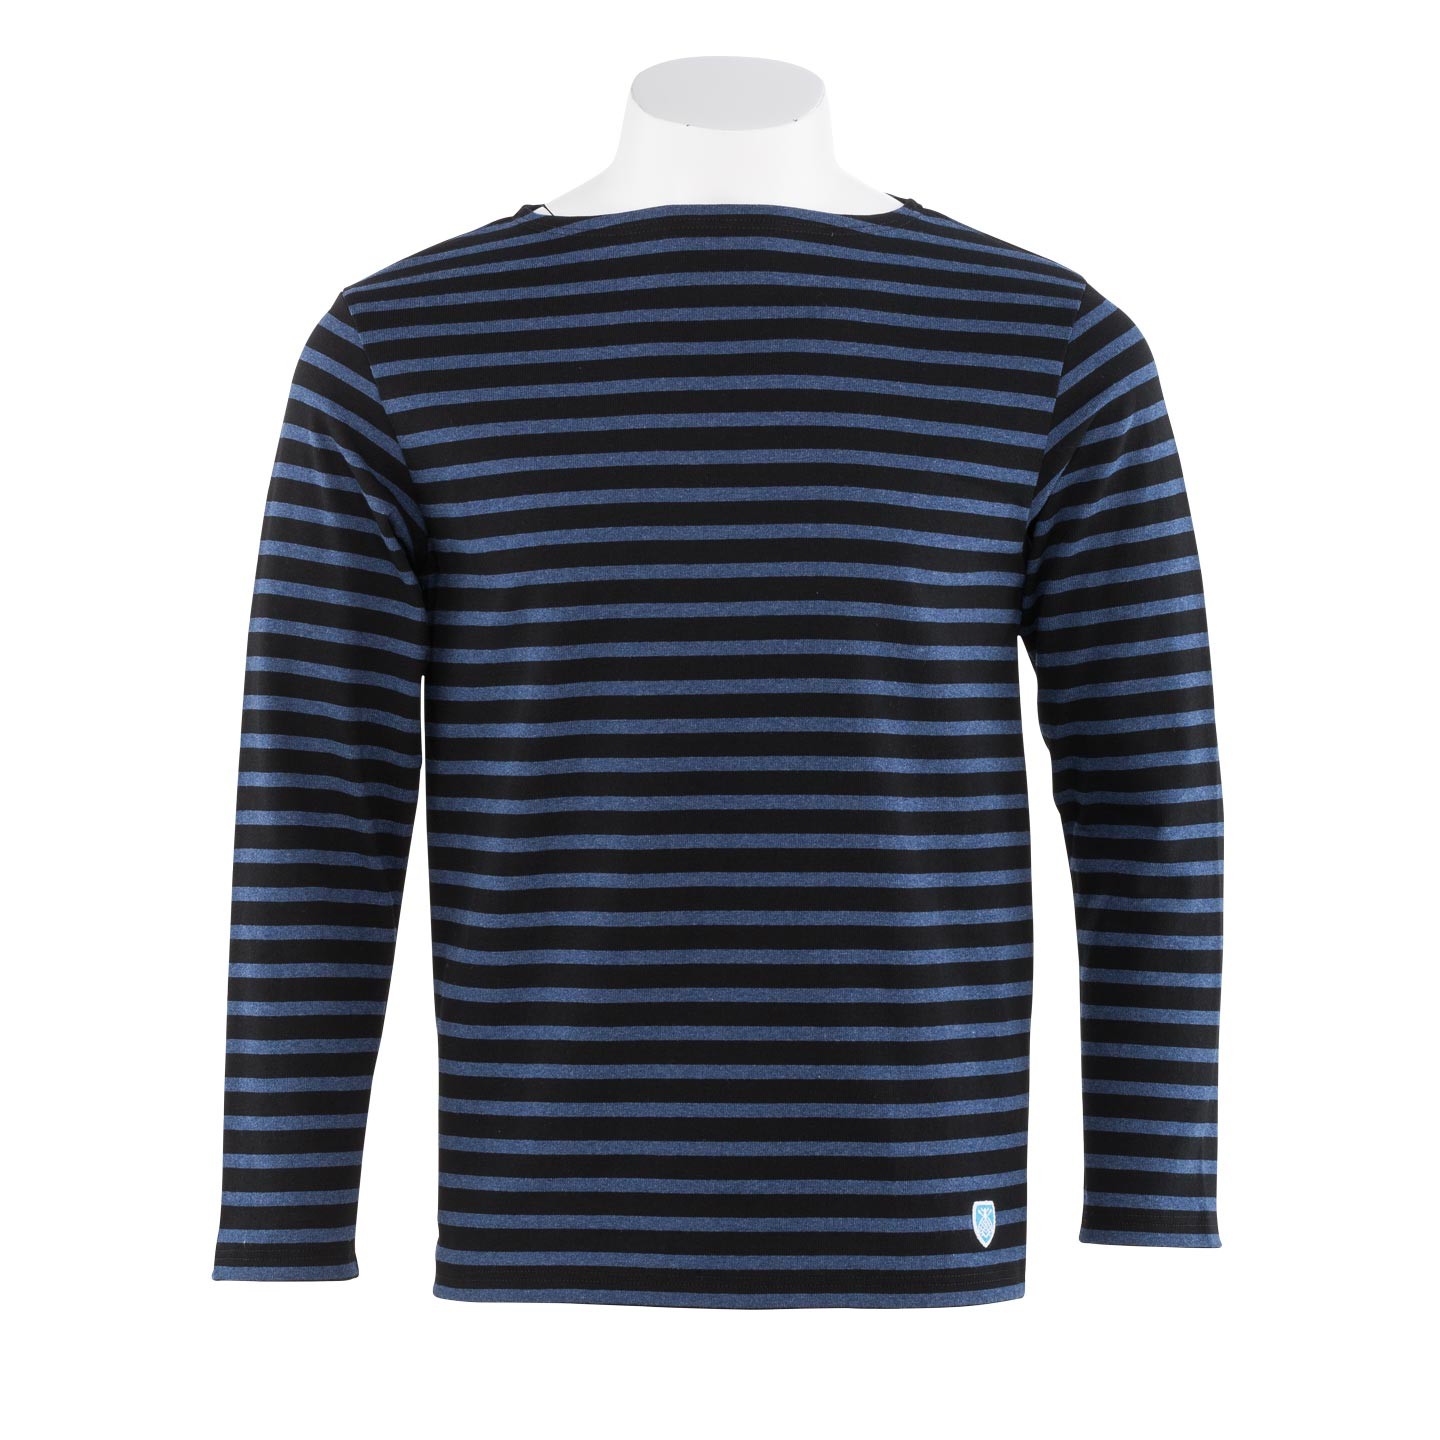 Striped shirt Black / Mixed Indigo, unisex made in France Orcival